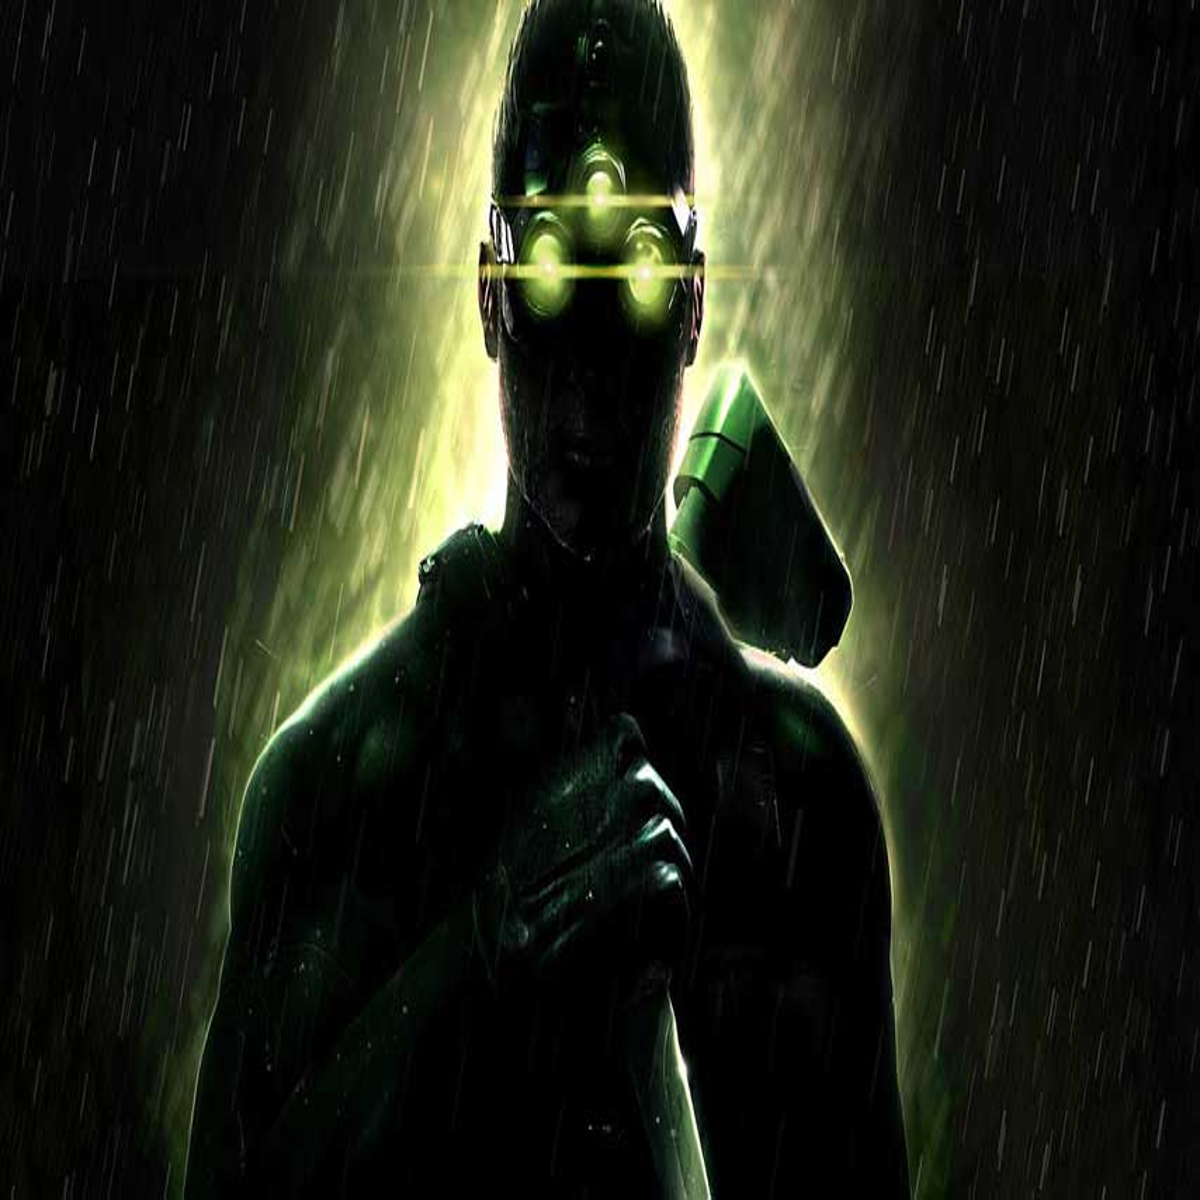 Splinter Cell: Conviction is now backward compatible on Xbox One